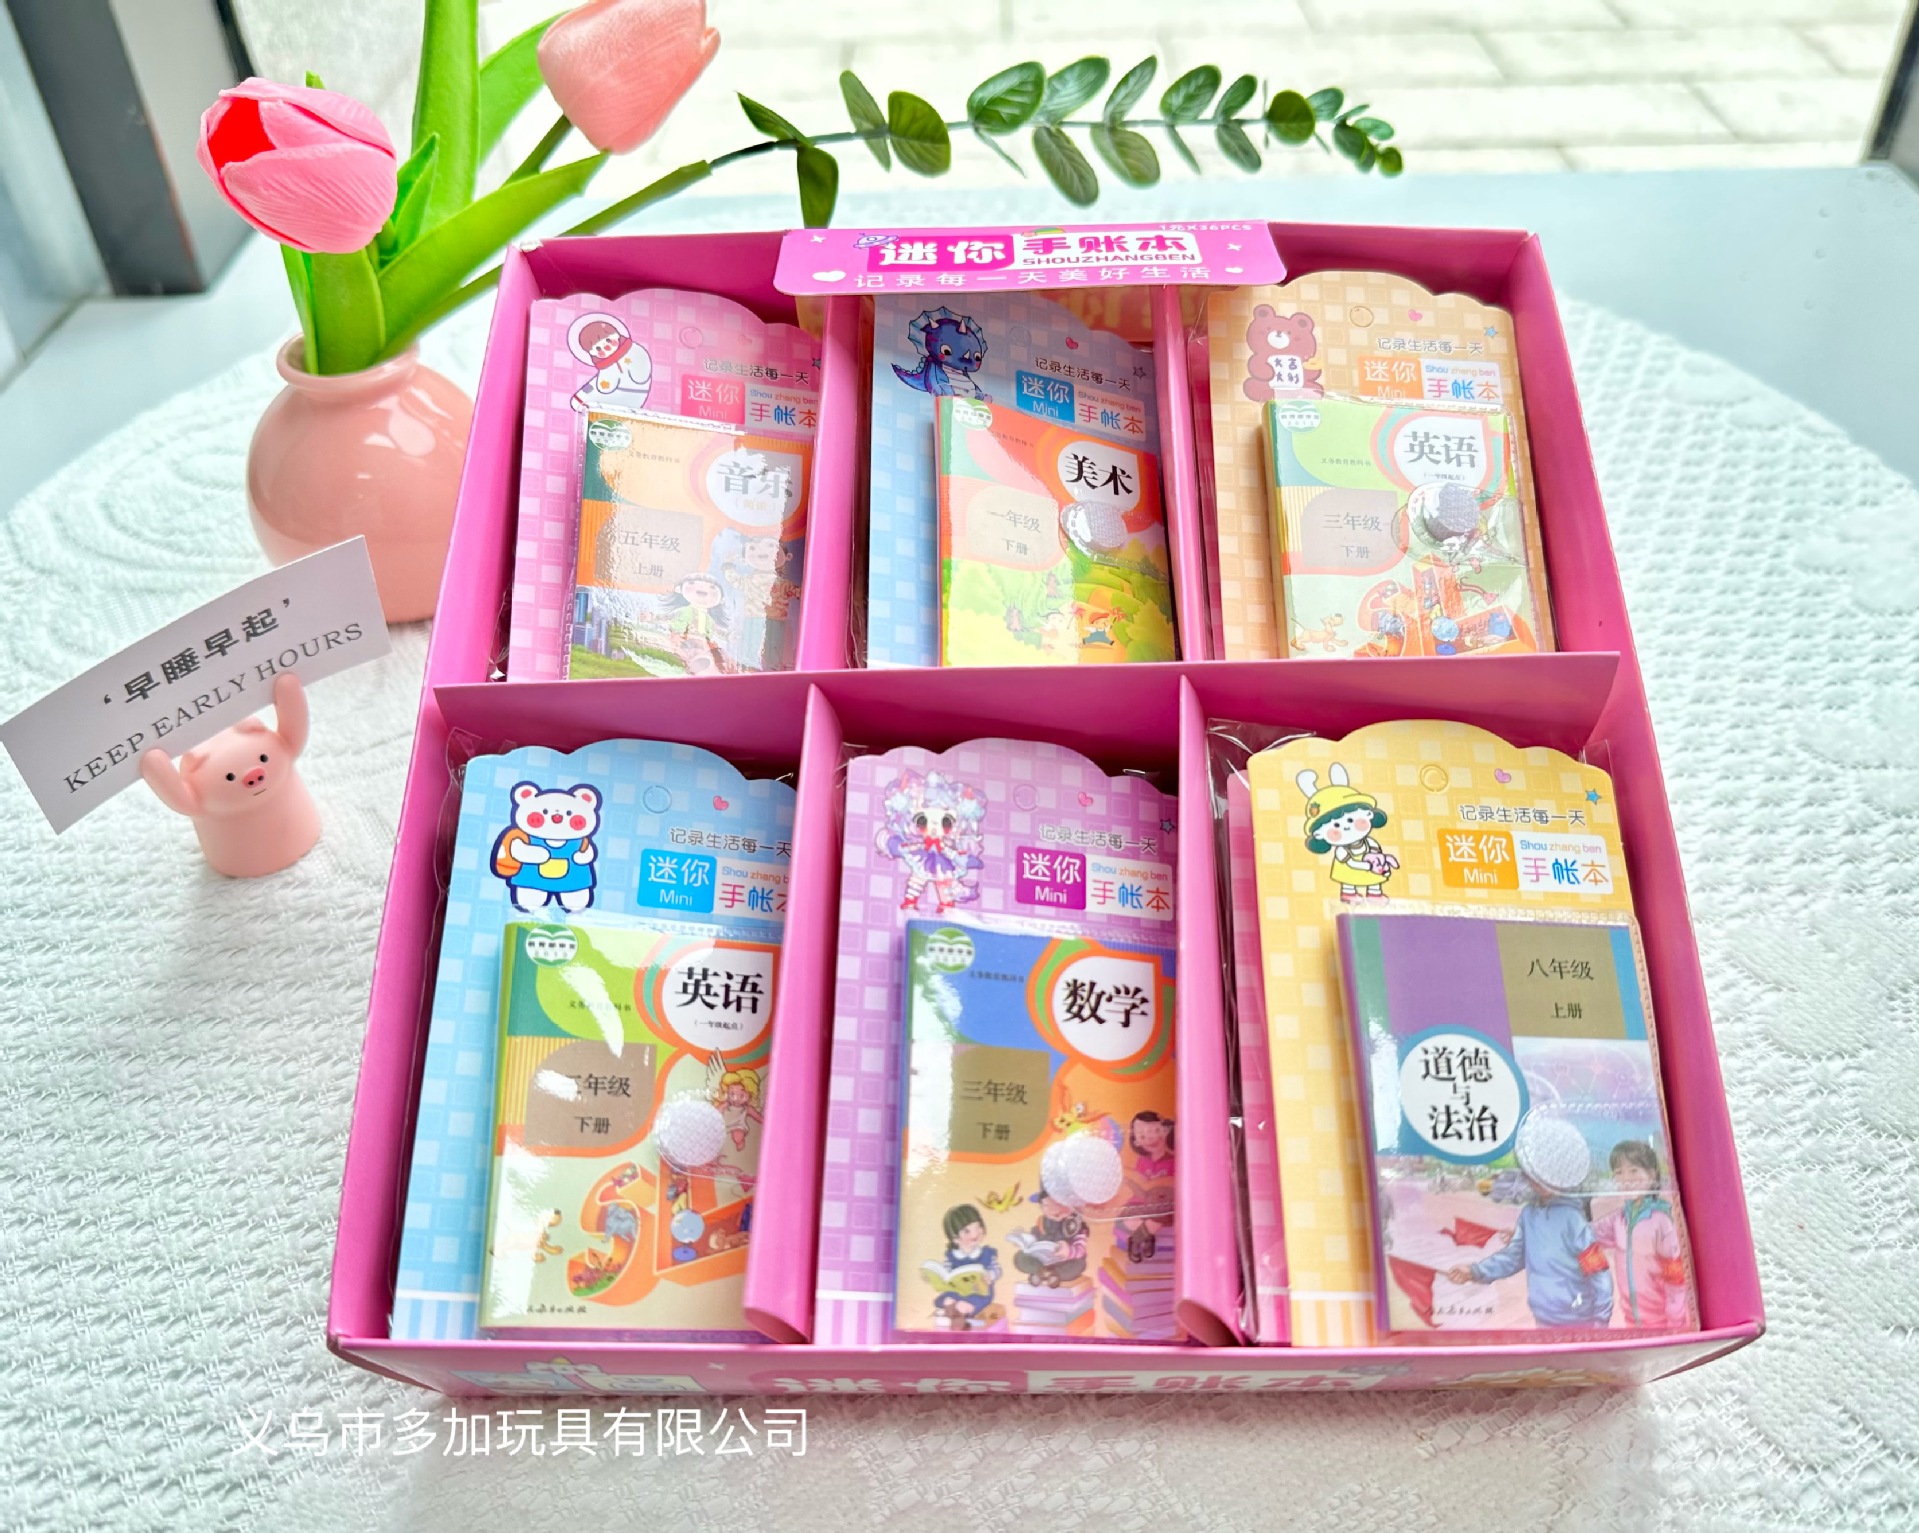 A36 into Creative Mini Textbook Mini Journal Book Pocket Notebook Pocket Book a Variety of Subjects Sell Well